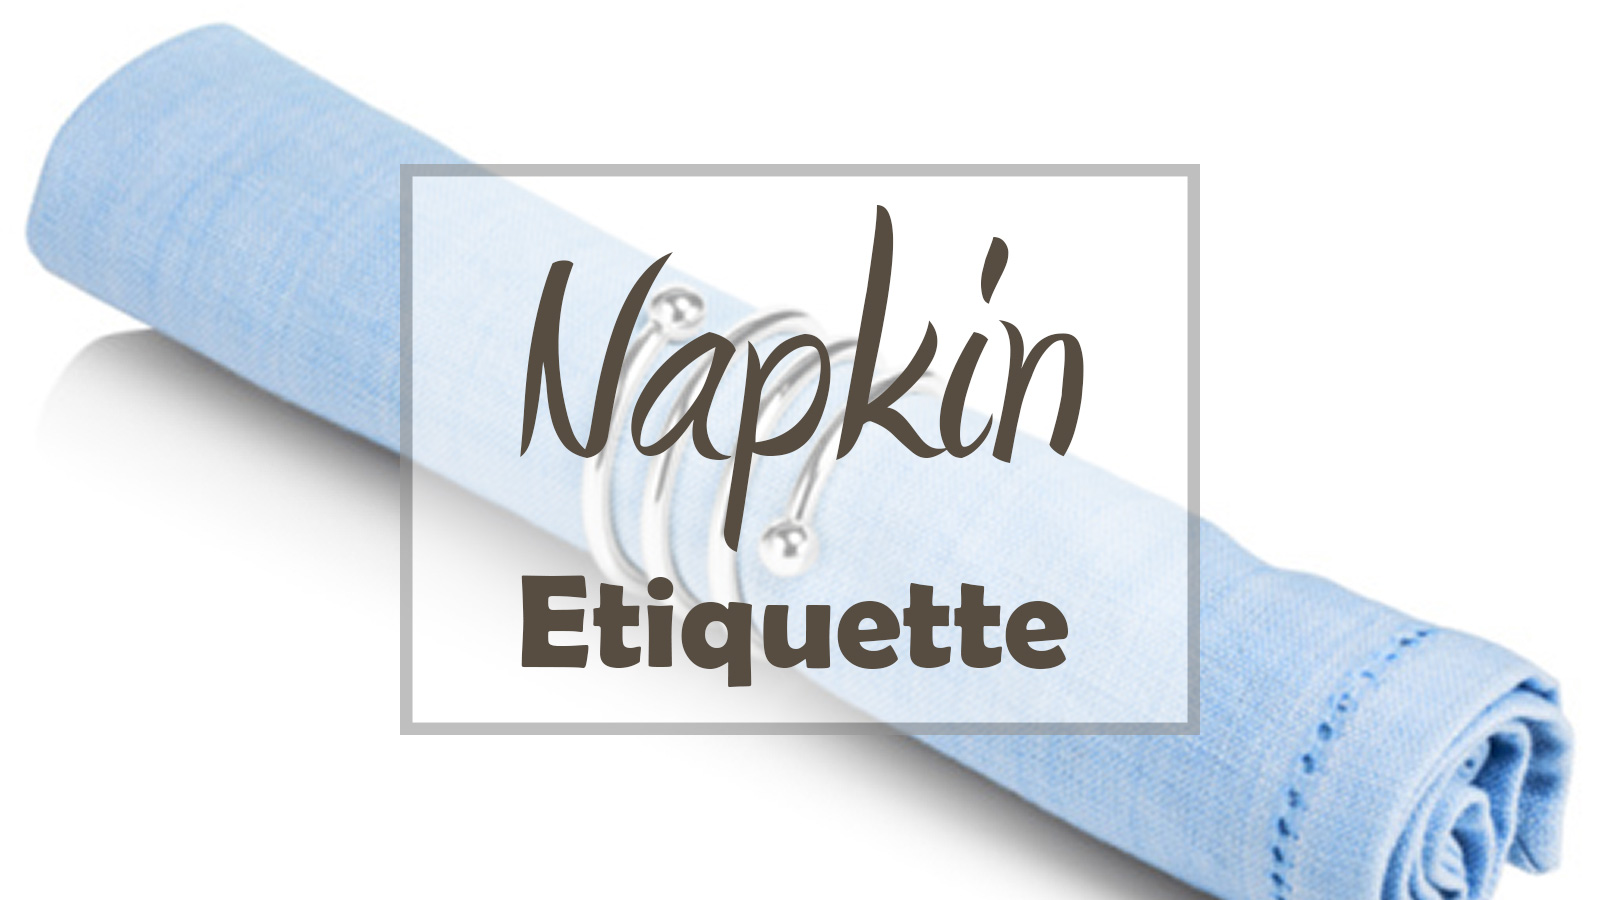 Basic Dining Etiquette: The Proper Way to Use a Napkin - Dengarden